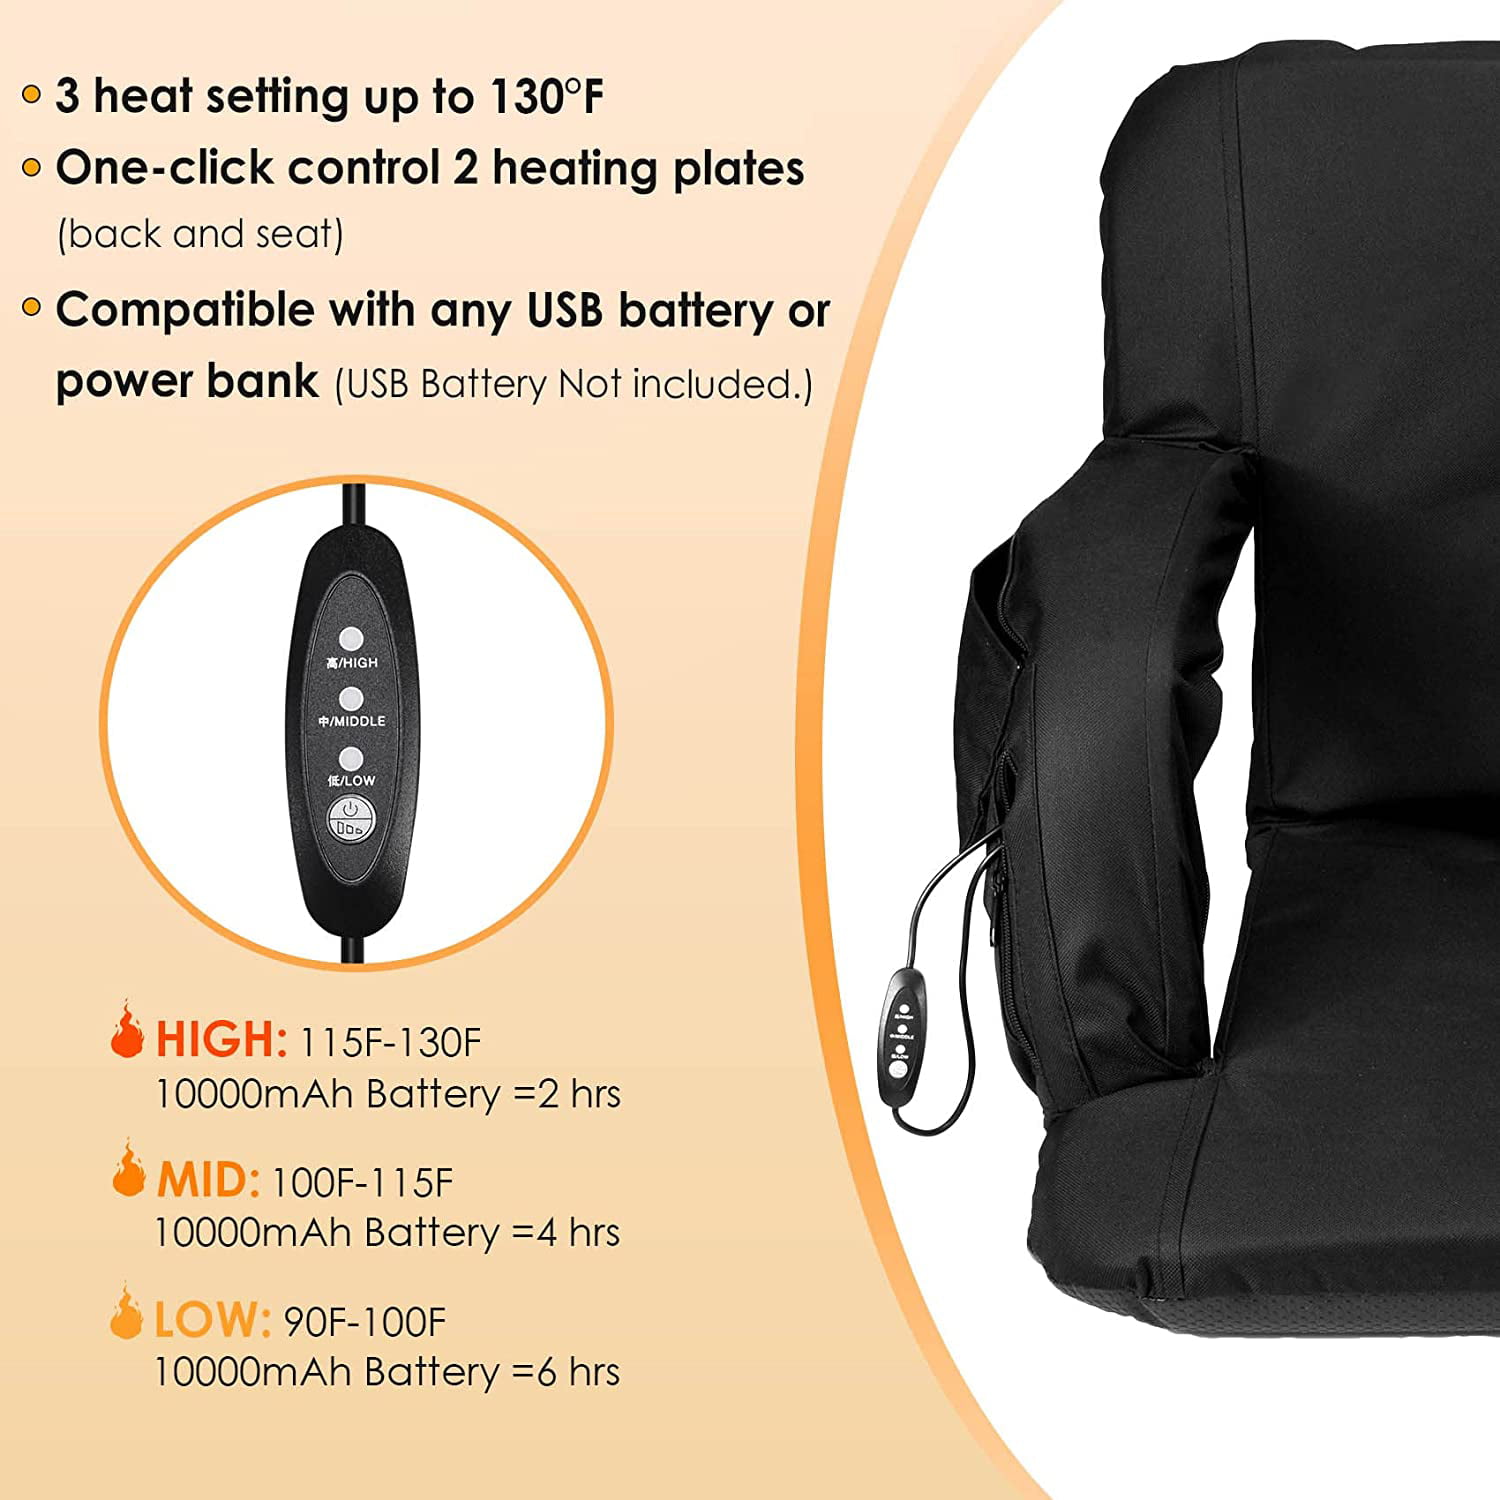 SOJOY Heated Stadium Seats for Bleacher with Back Support, 25 Extra Wide  Folded Bleacher Chair USB Heat for Outdoor Camping (Battery is NOT  INCLUDED) - Online Shopping for Car Heated Blankets,Heated Seat